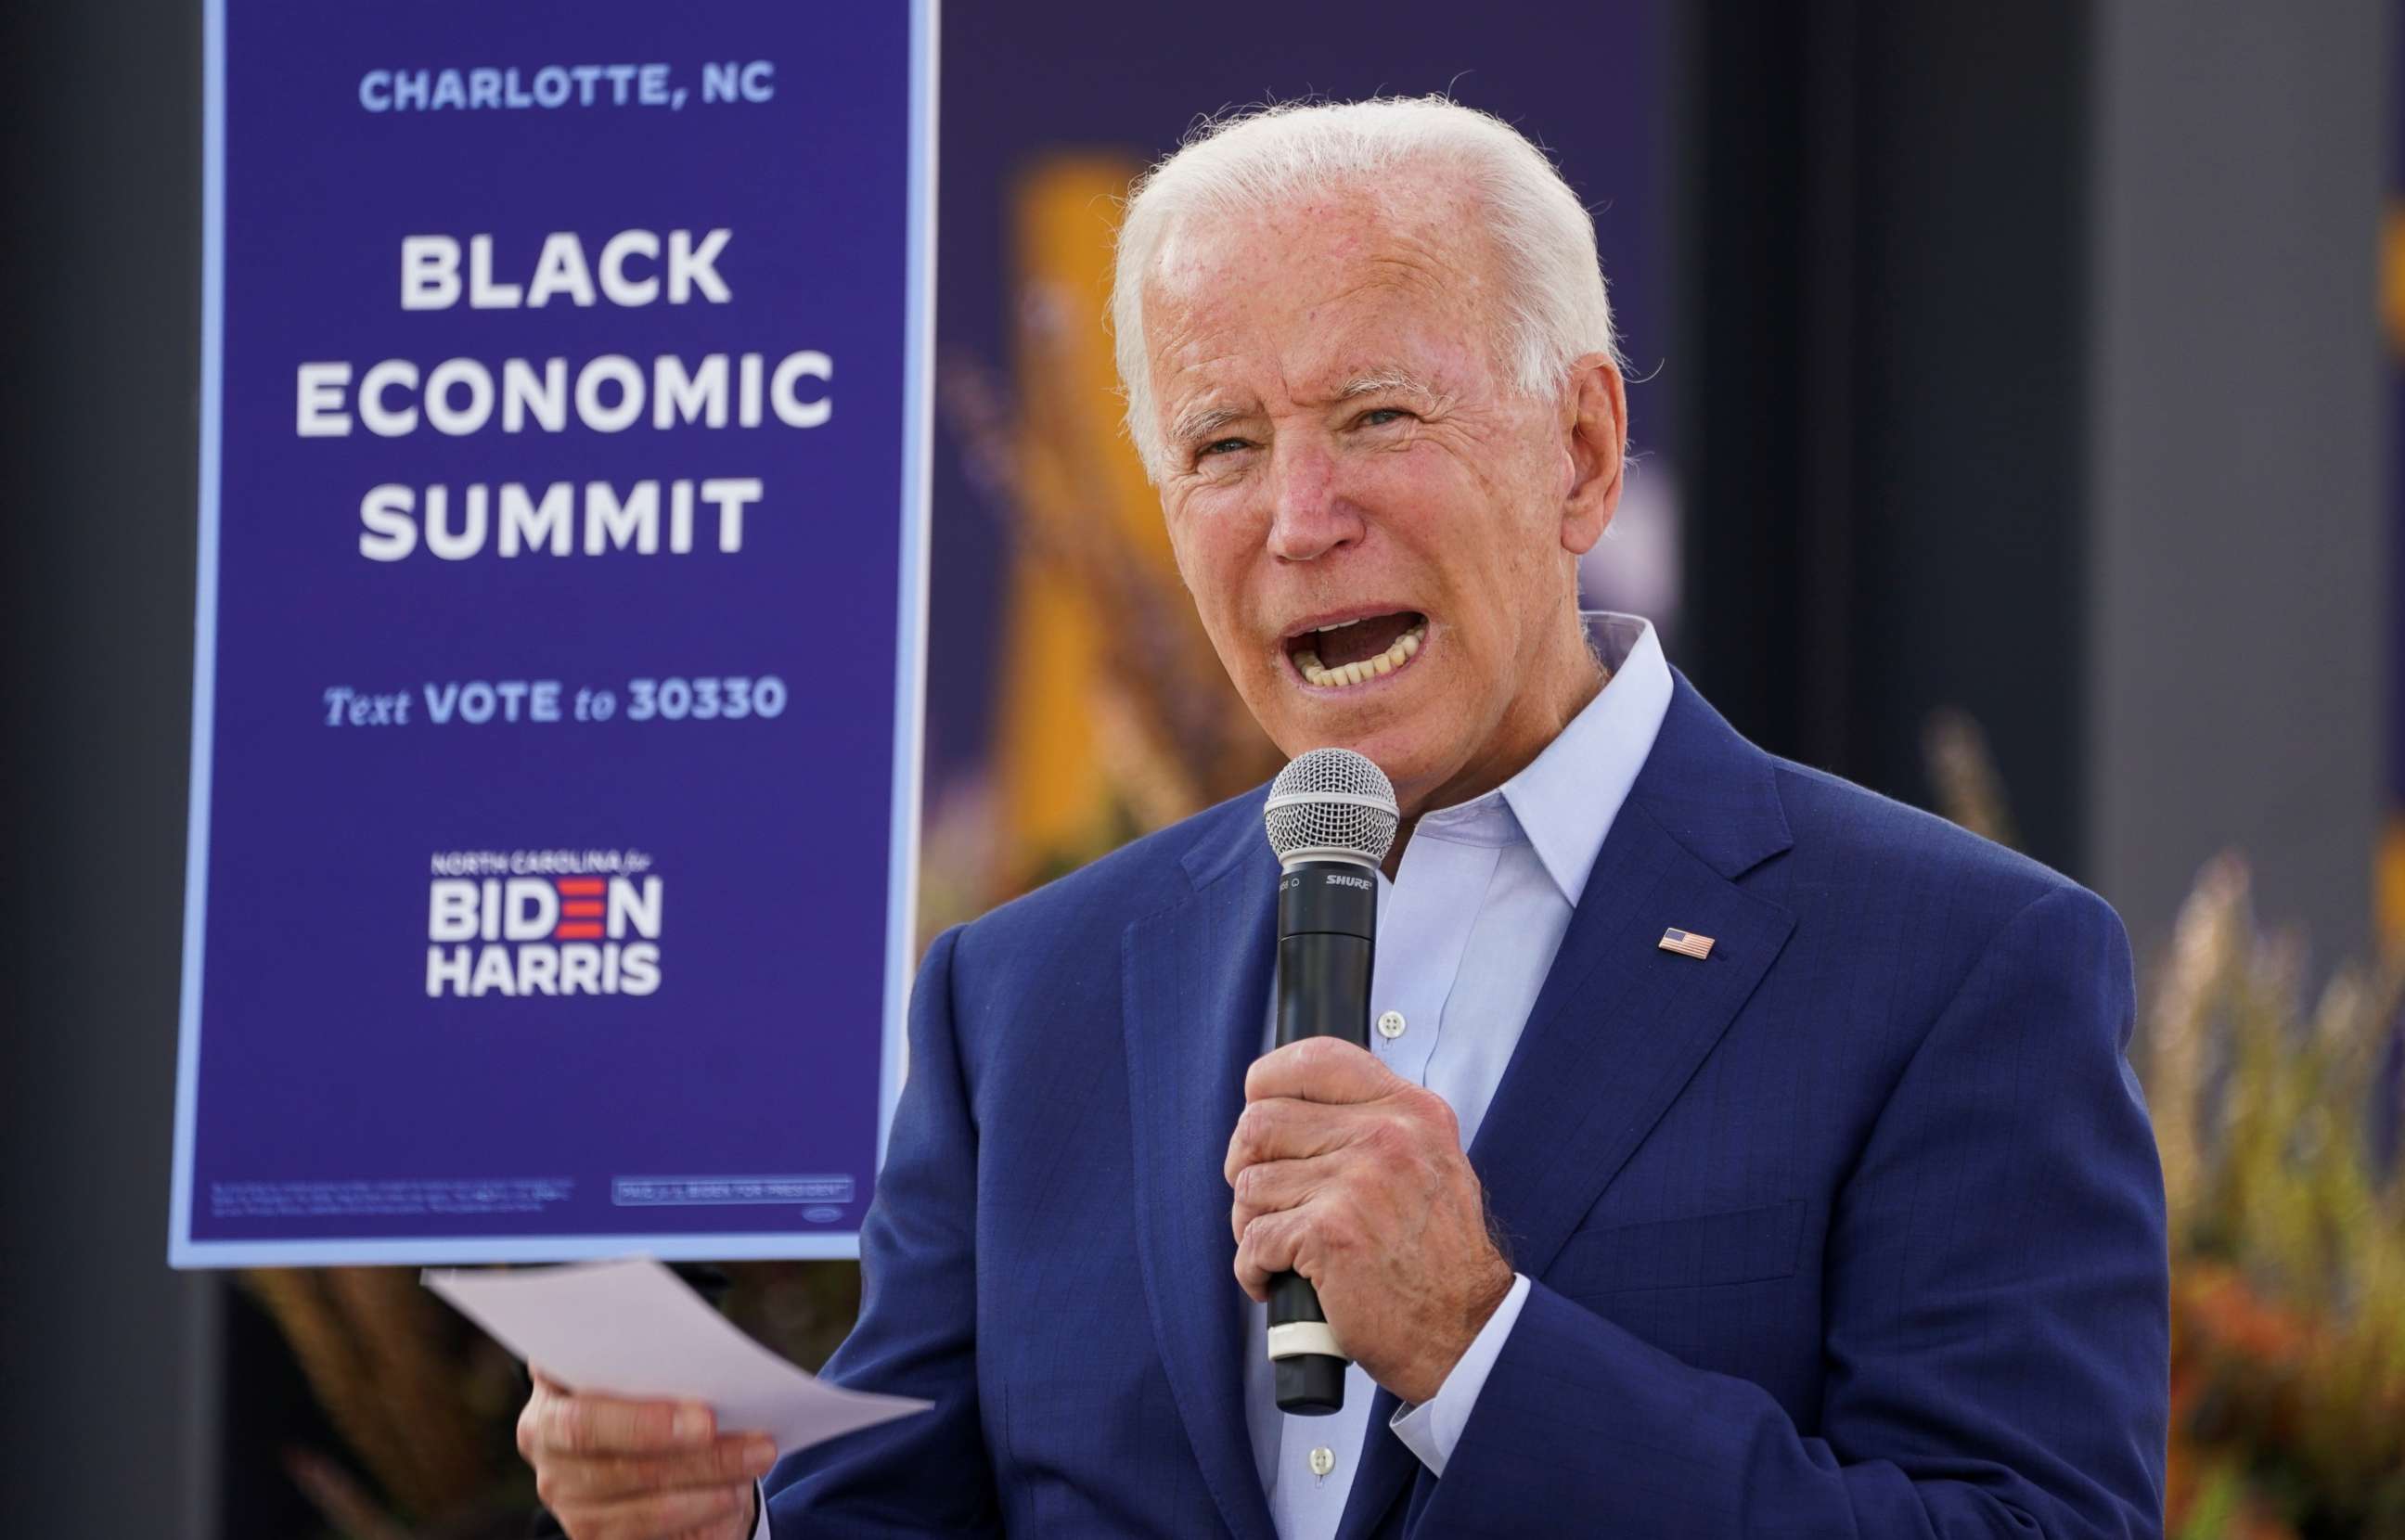 PHOTO: Democratic presidential nominee Joe Biden speaks at an outdoor "Black Economic Summit" while campaigning for president in Charlotte, N.C., Sept. 23, 2020.